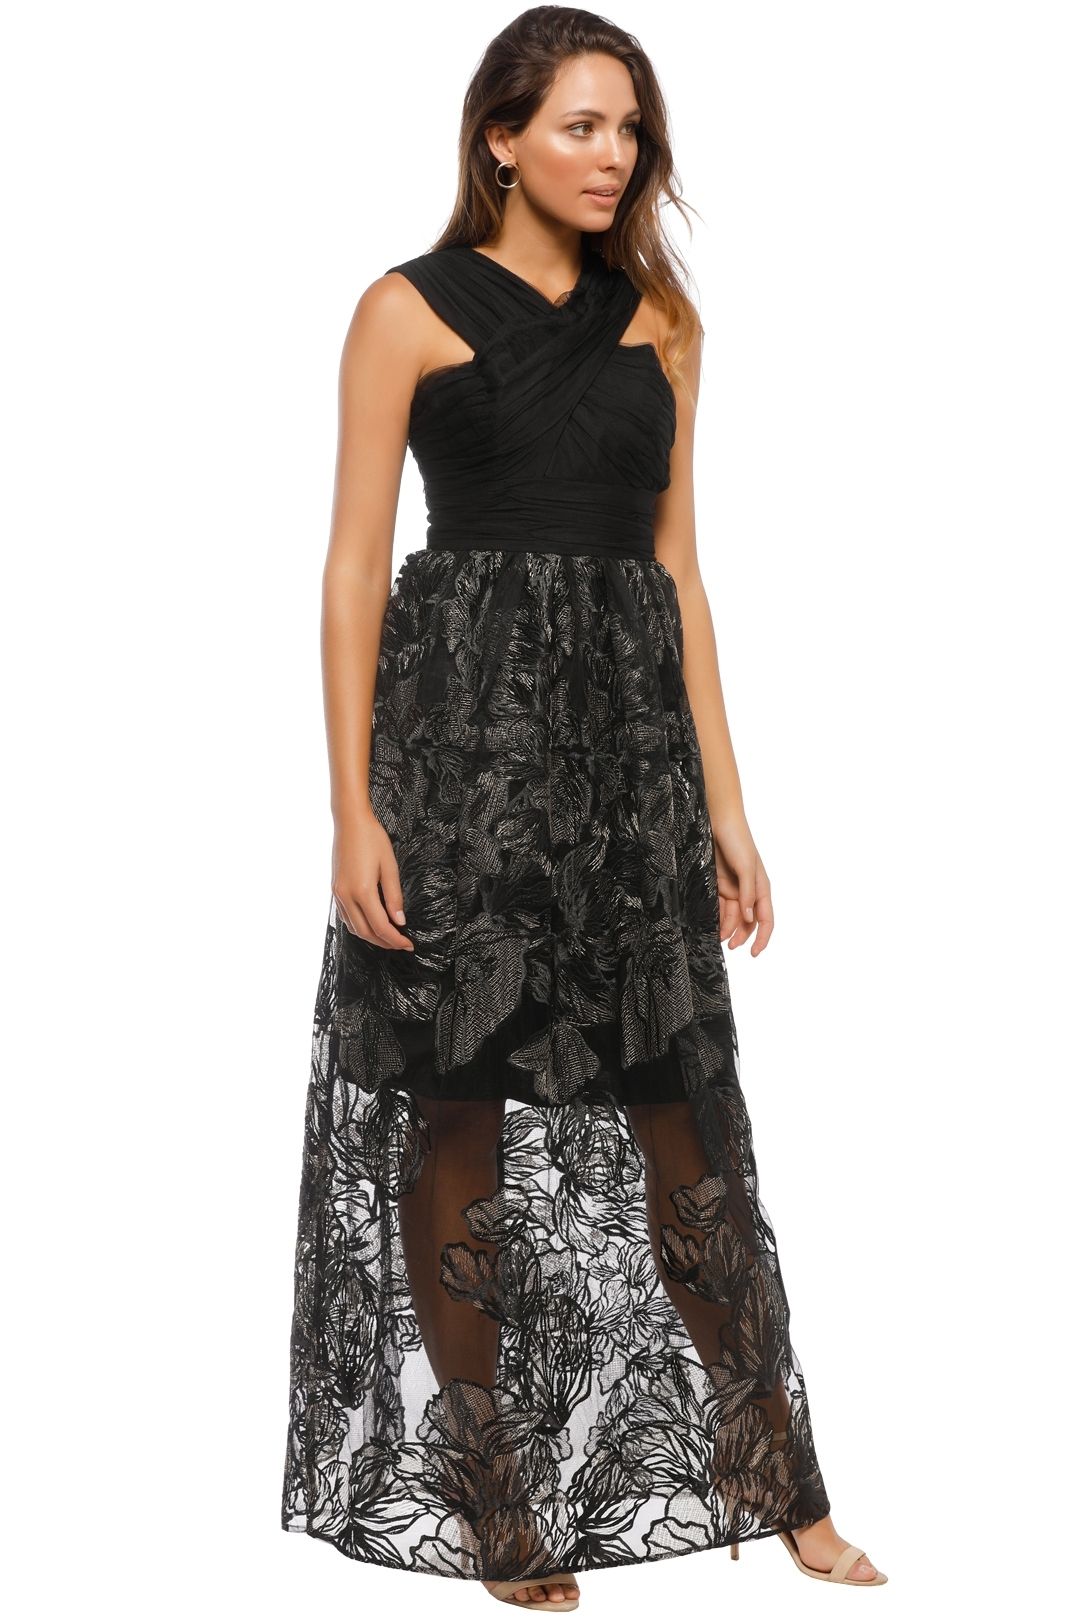 Grace and Hart - Summer Glow Ball Gown - Black - Side